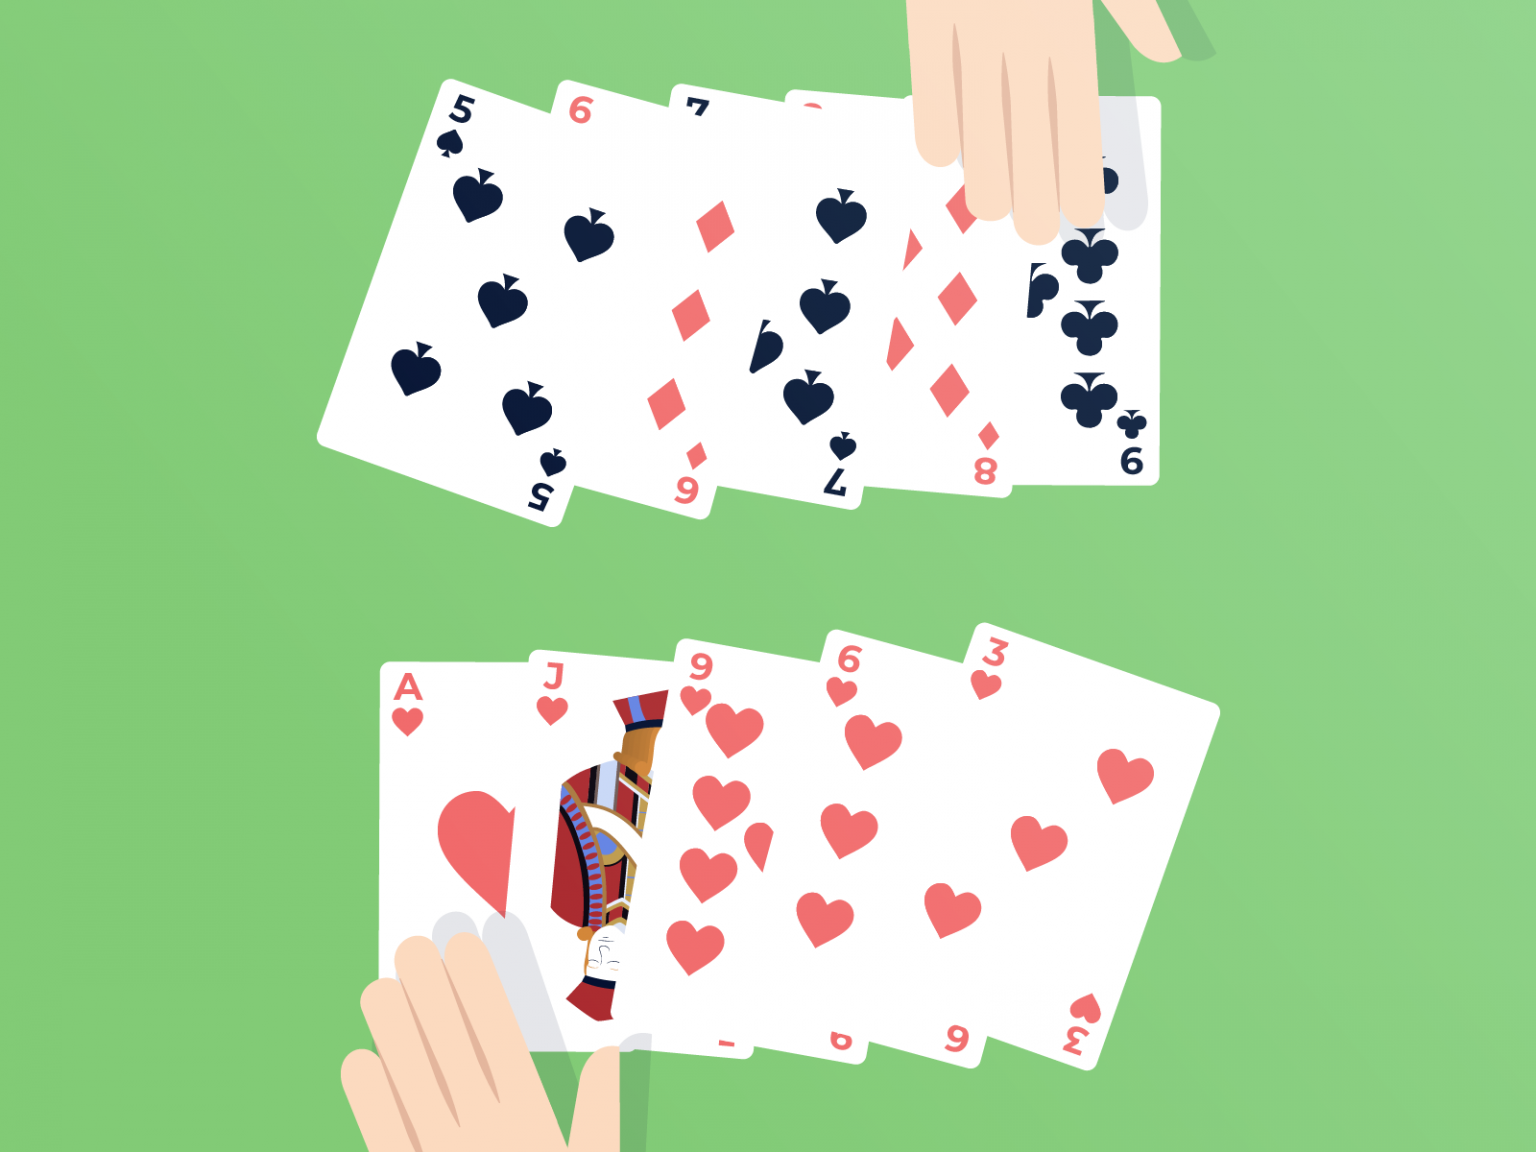 How To Play 5 Card Draw Poker 5 Card Draw Rules, Odds, Tips & More